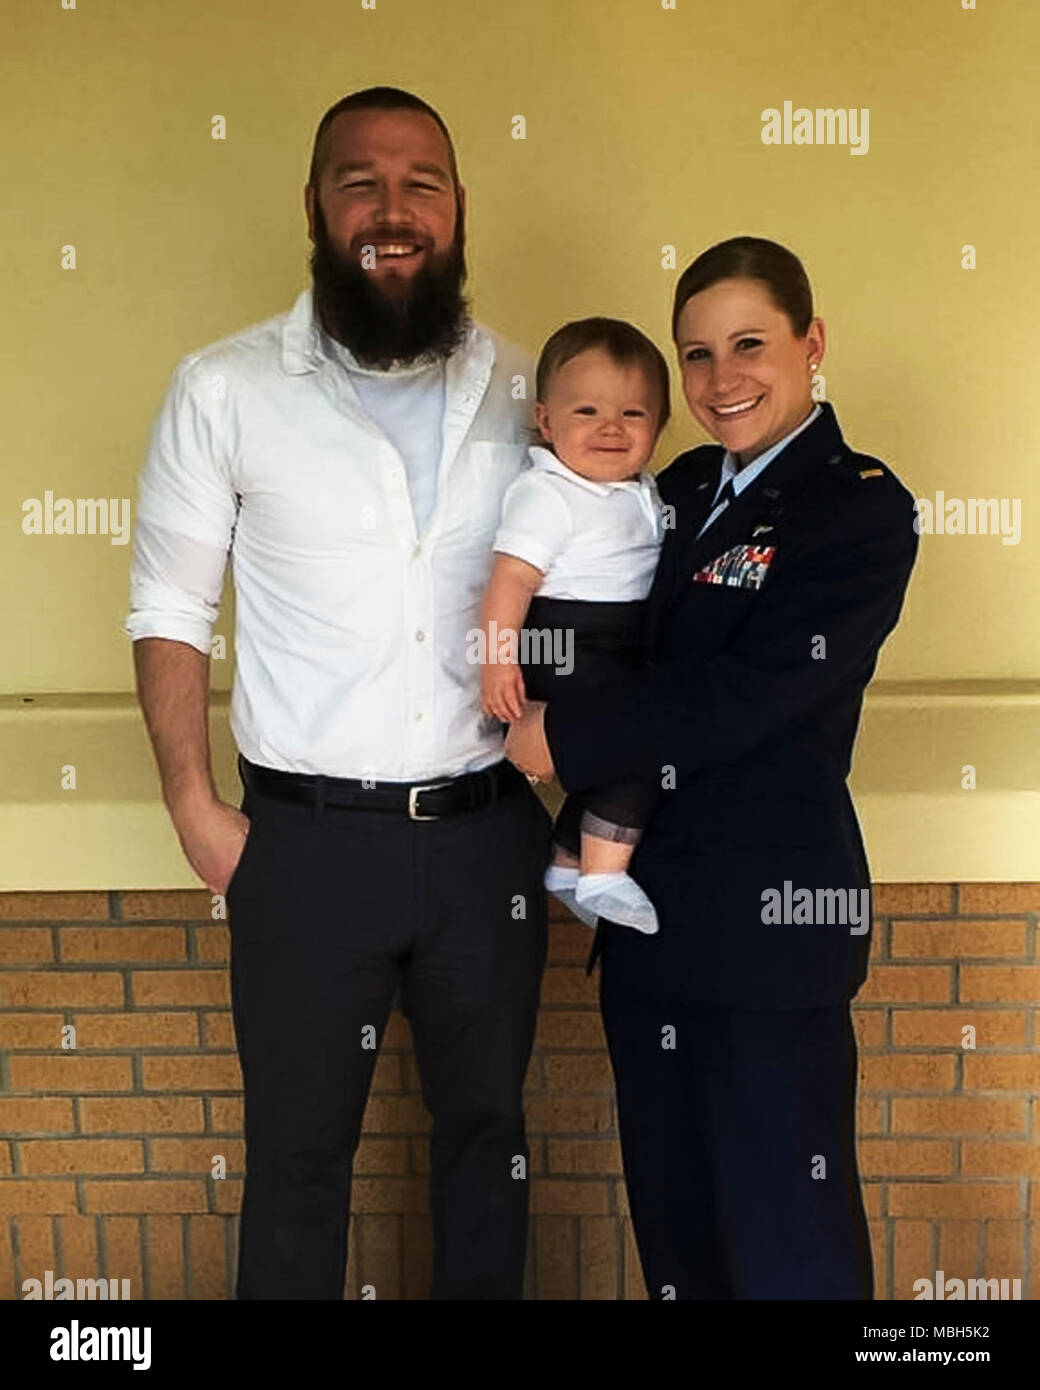 U.S. Air Force 2nd Lt. Sam Norville, a force support officer with the 182nd Airlift Wing, Illinois Air National Guard, poses for a photo with her spouse and child after graduating from Total Force Officer Training in  Maxwell Air Force Base, Ala., March 10, 2017. She served as an enlisted air transportation specialist before the military funded her bachelor’s degree through the Illinois National Guard Grant, leading her to commissioning. Stock Photo